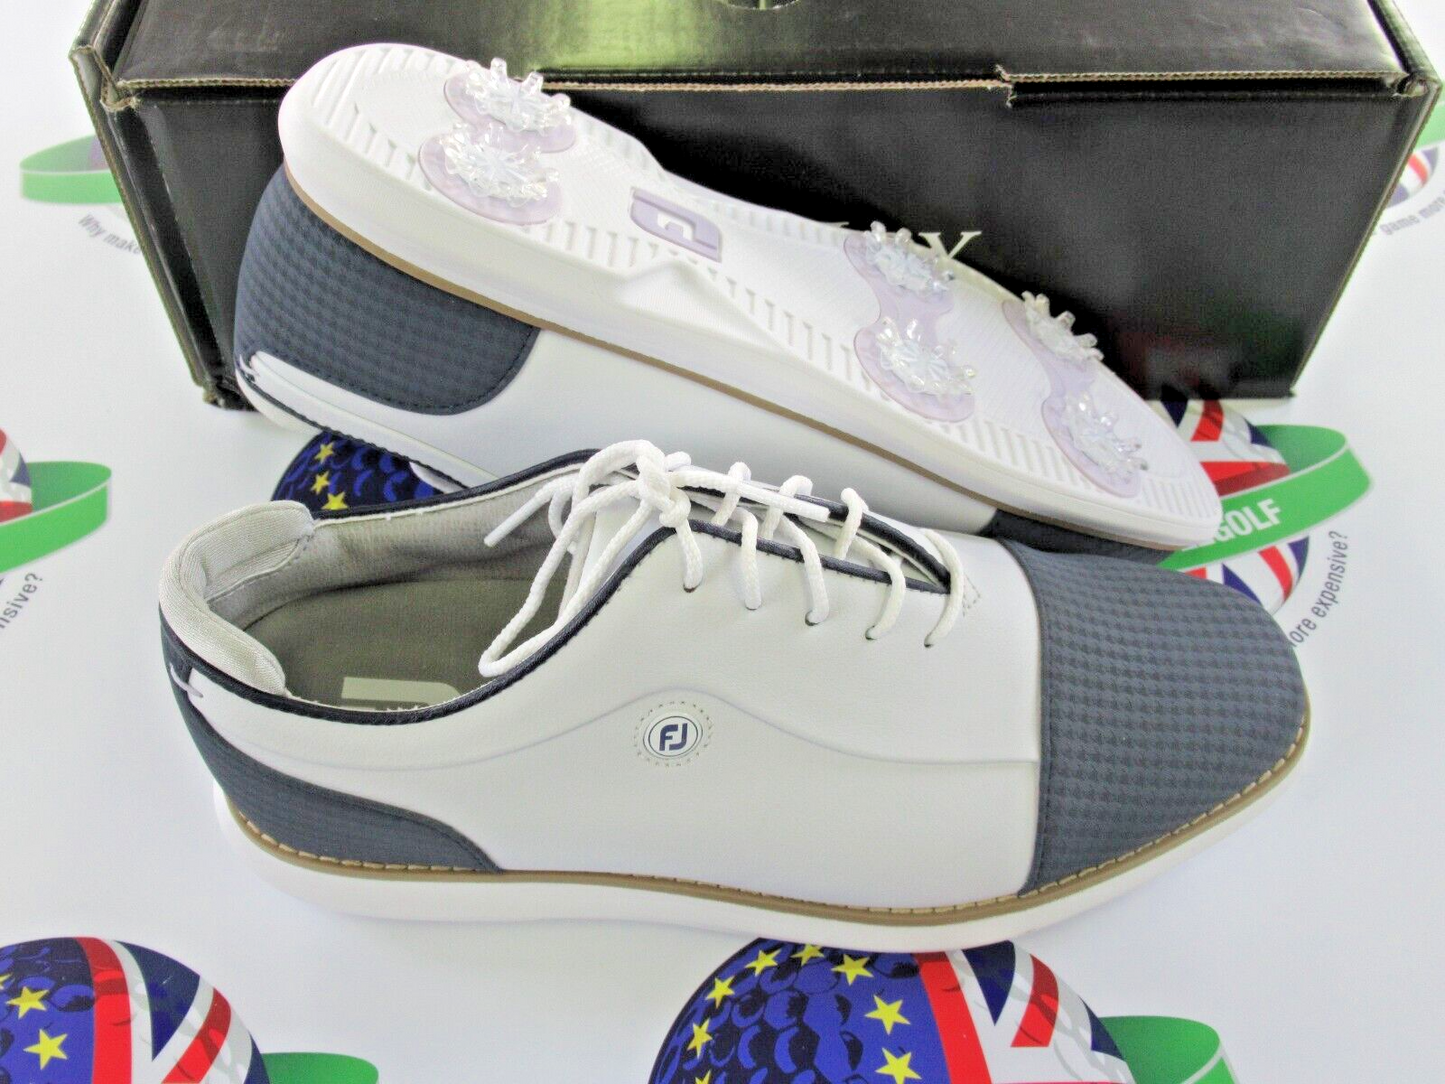 footjoy fj traditions womens golf shoes 97915k white/navy size 5.5 wide/large